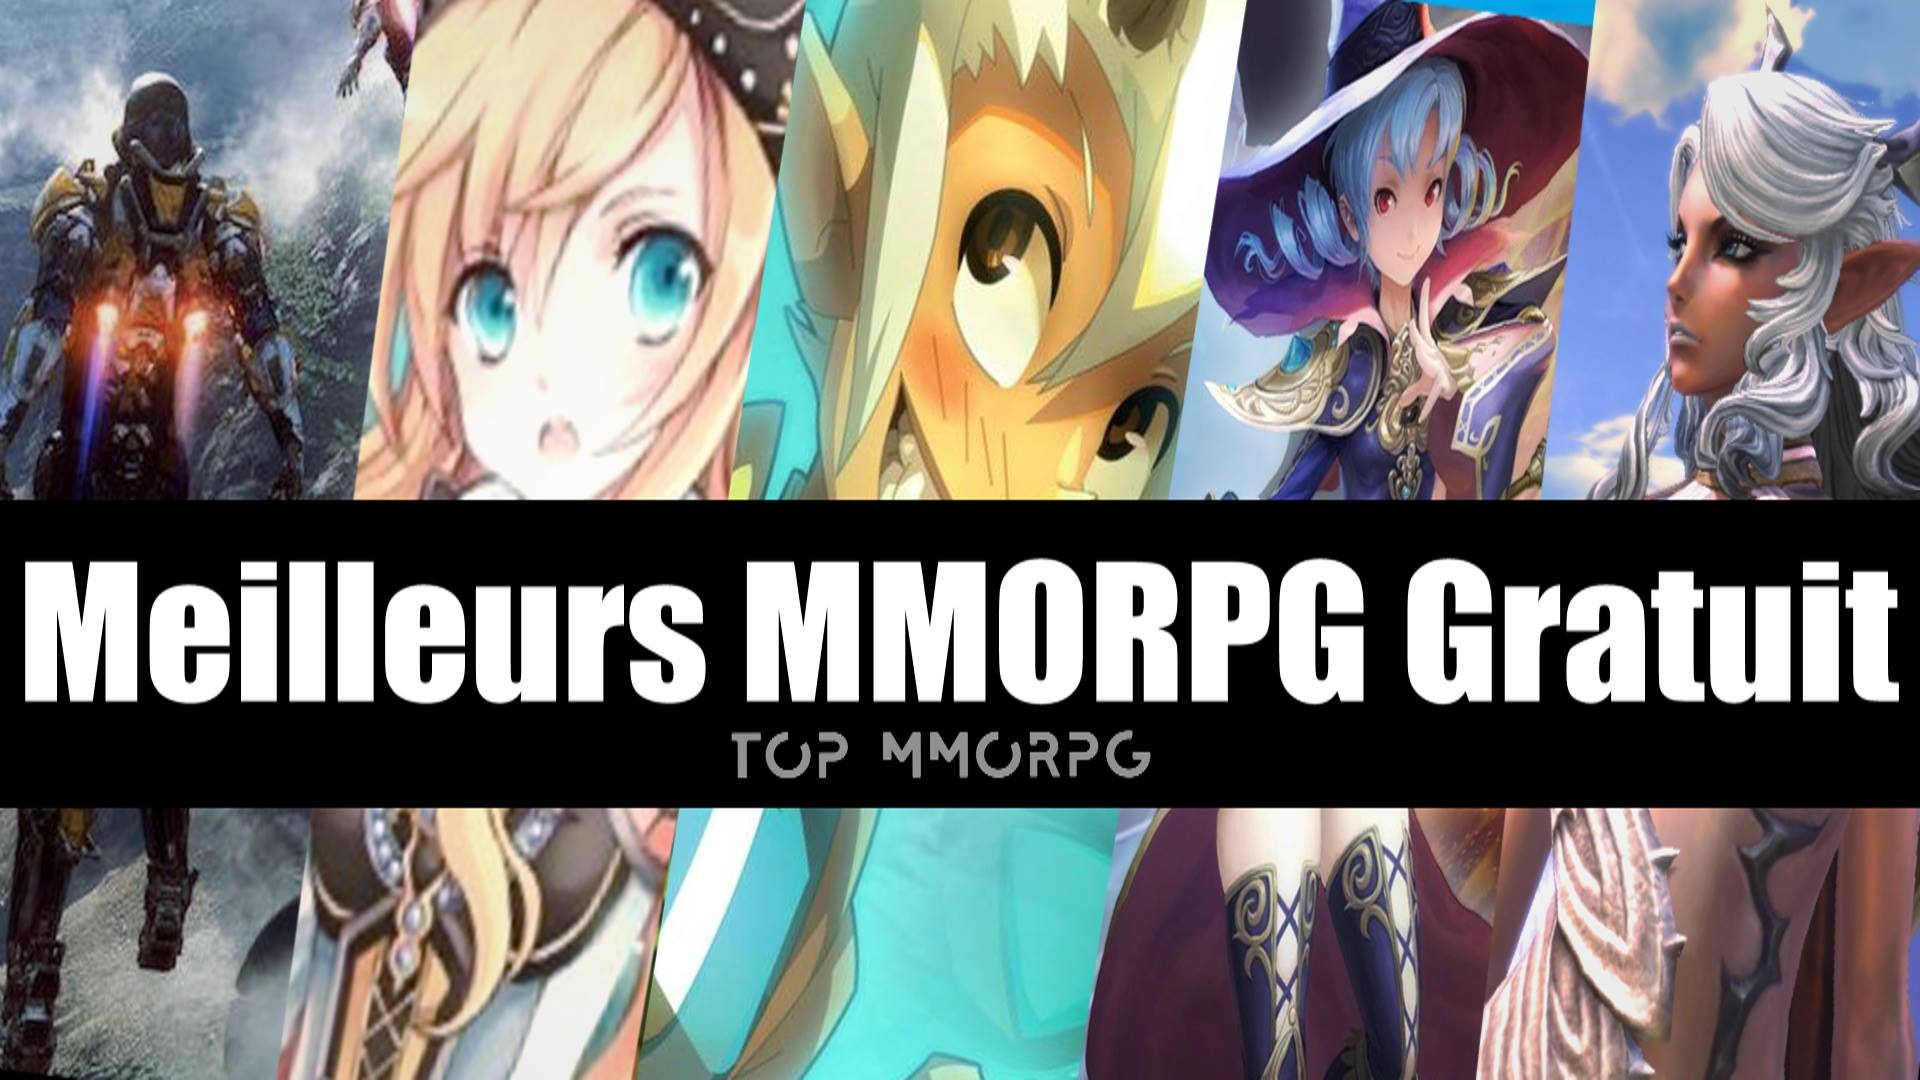 Free 2017 MMORPGs - Best Free To Play MMORPG